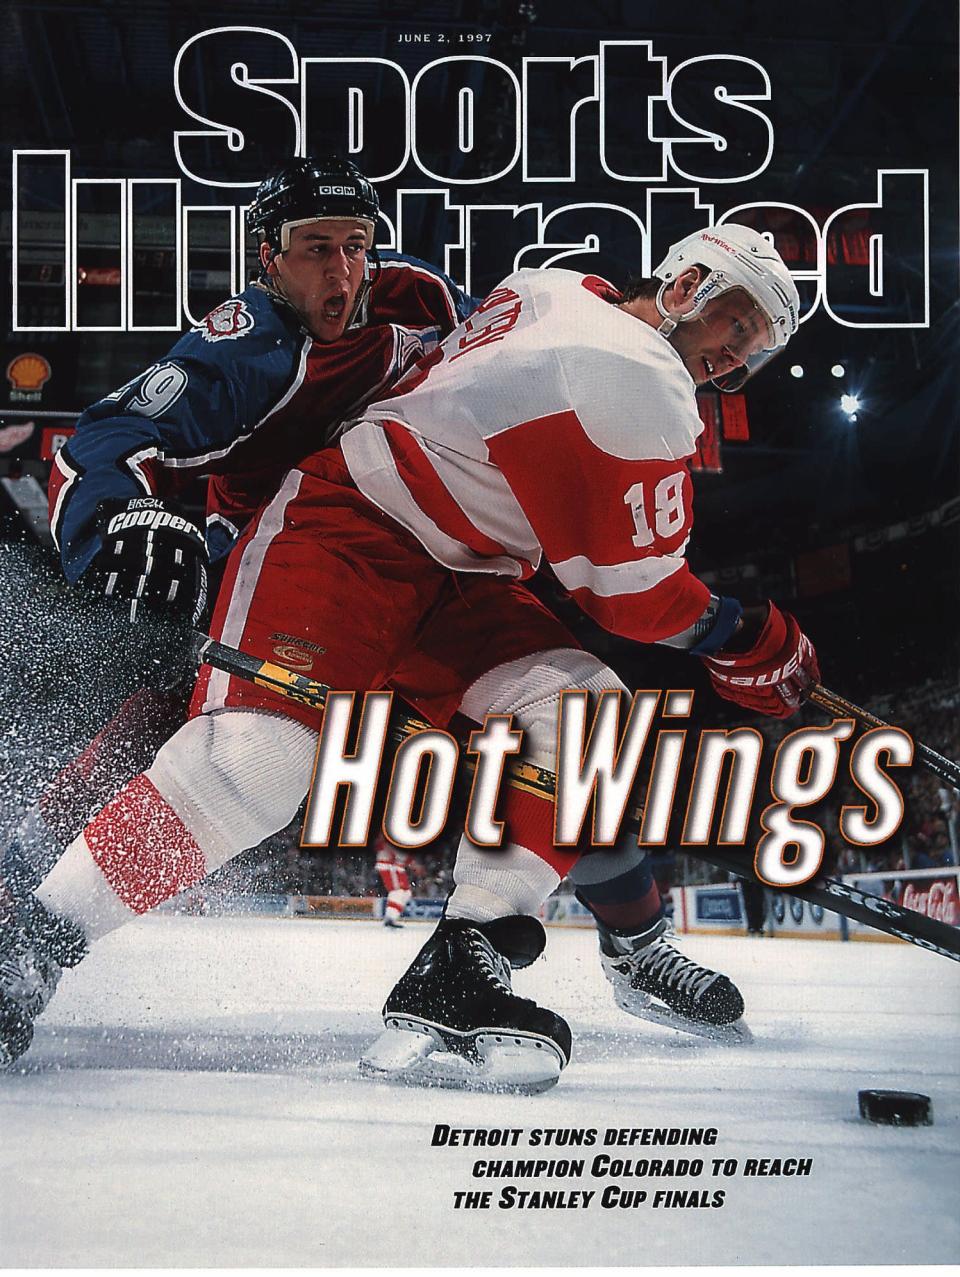 This is the cover of Sports Illustrated in May of 1997.